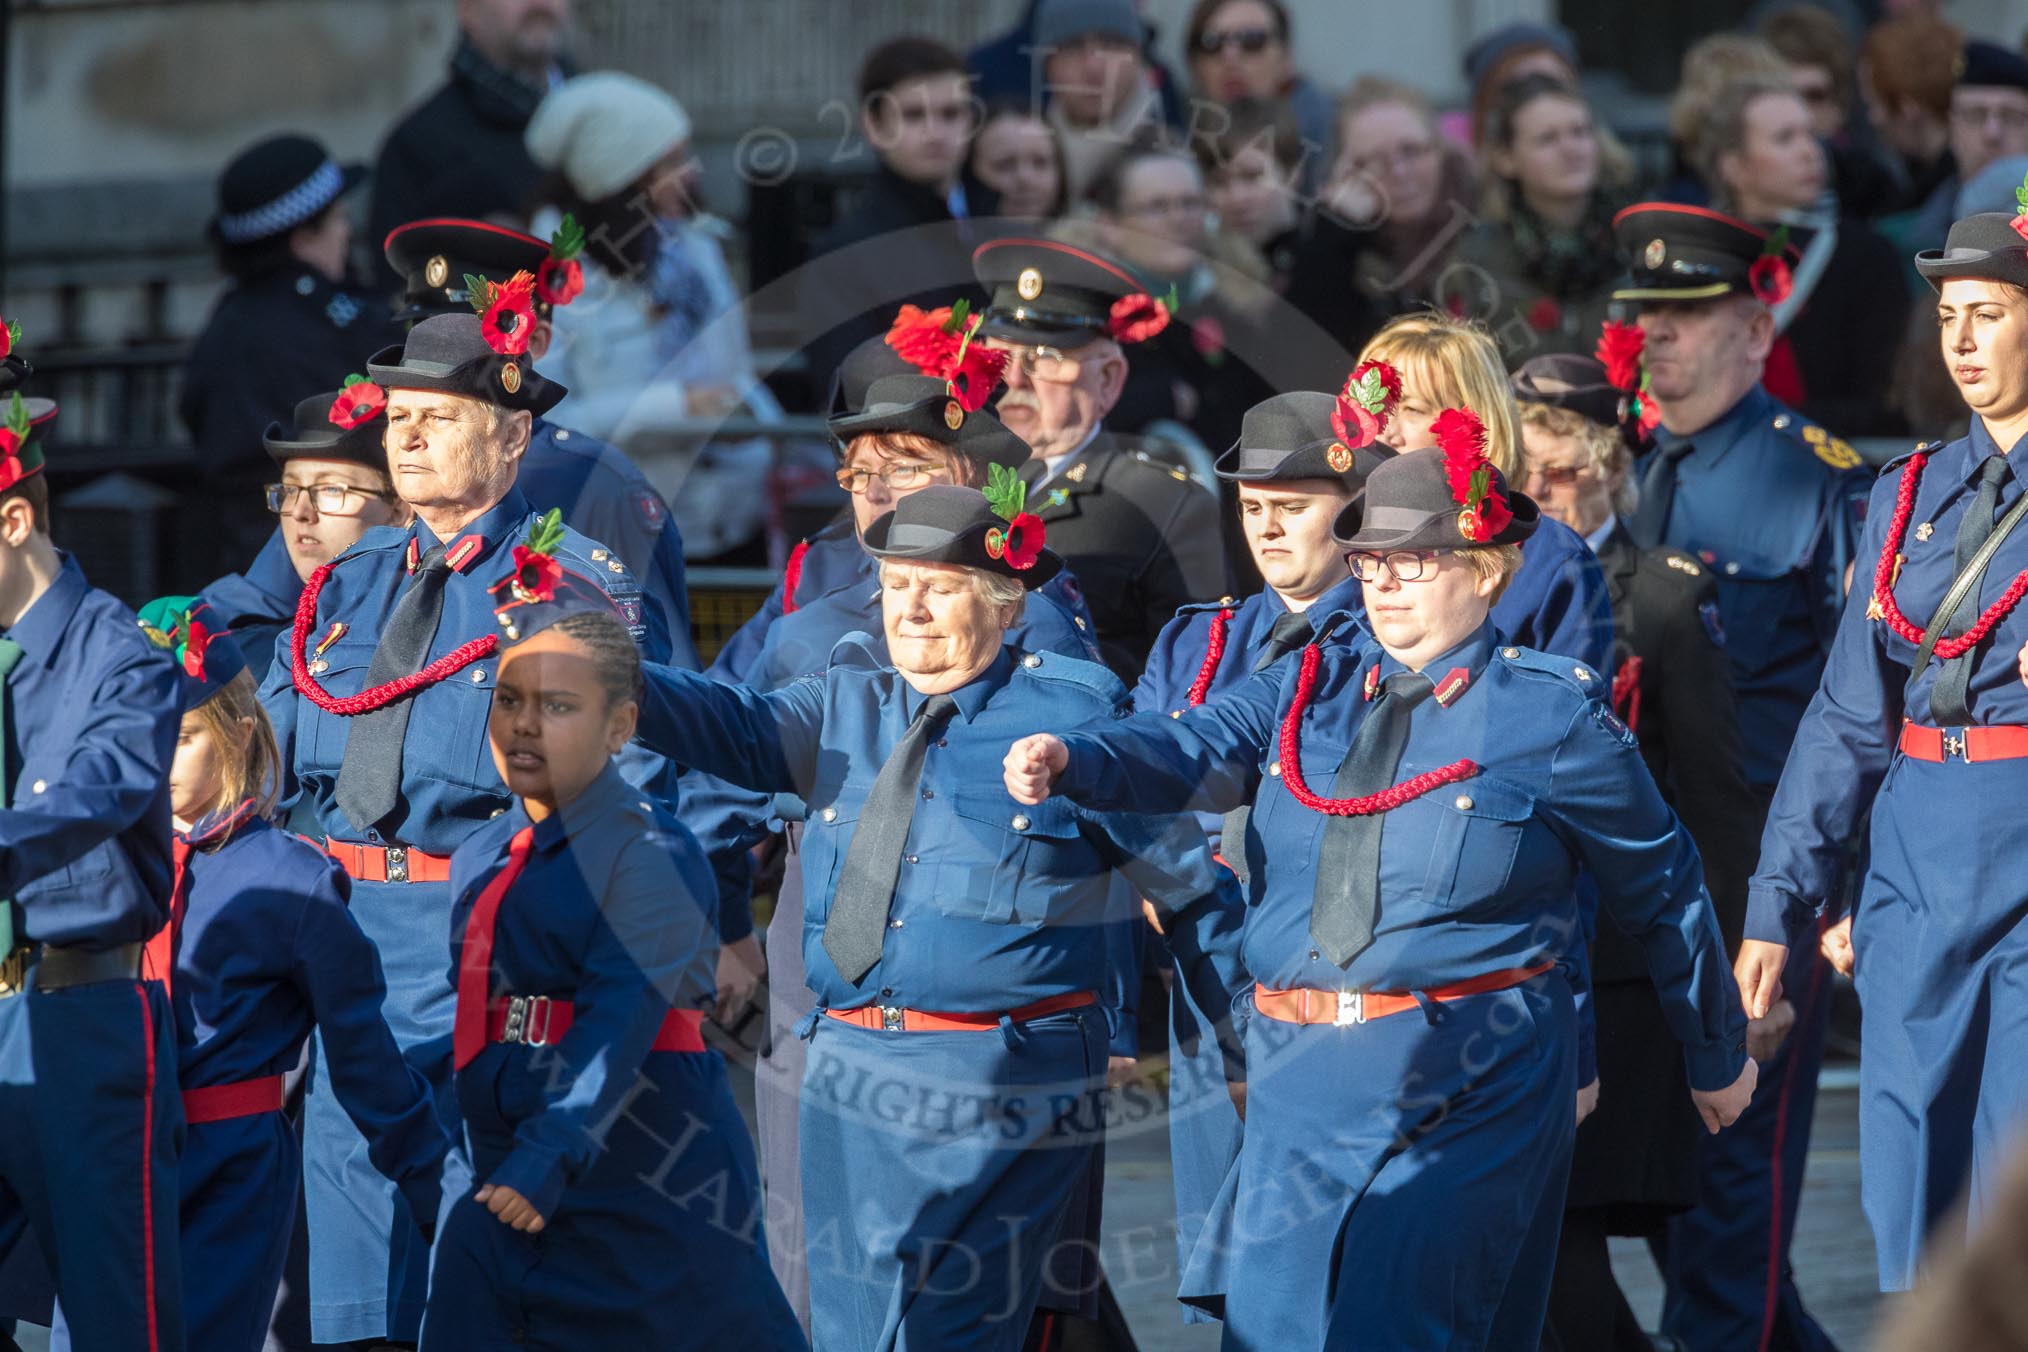 March Past, Remembrance Sunday at the Cenotaph 2016: M36 Church Lads & Church Girls Brigade.
Cenotaph, Whitehall, London SW1,
London,
Greater London,
United Kingdom,
on 13 November 2016 at 13:19, image #2891